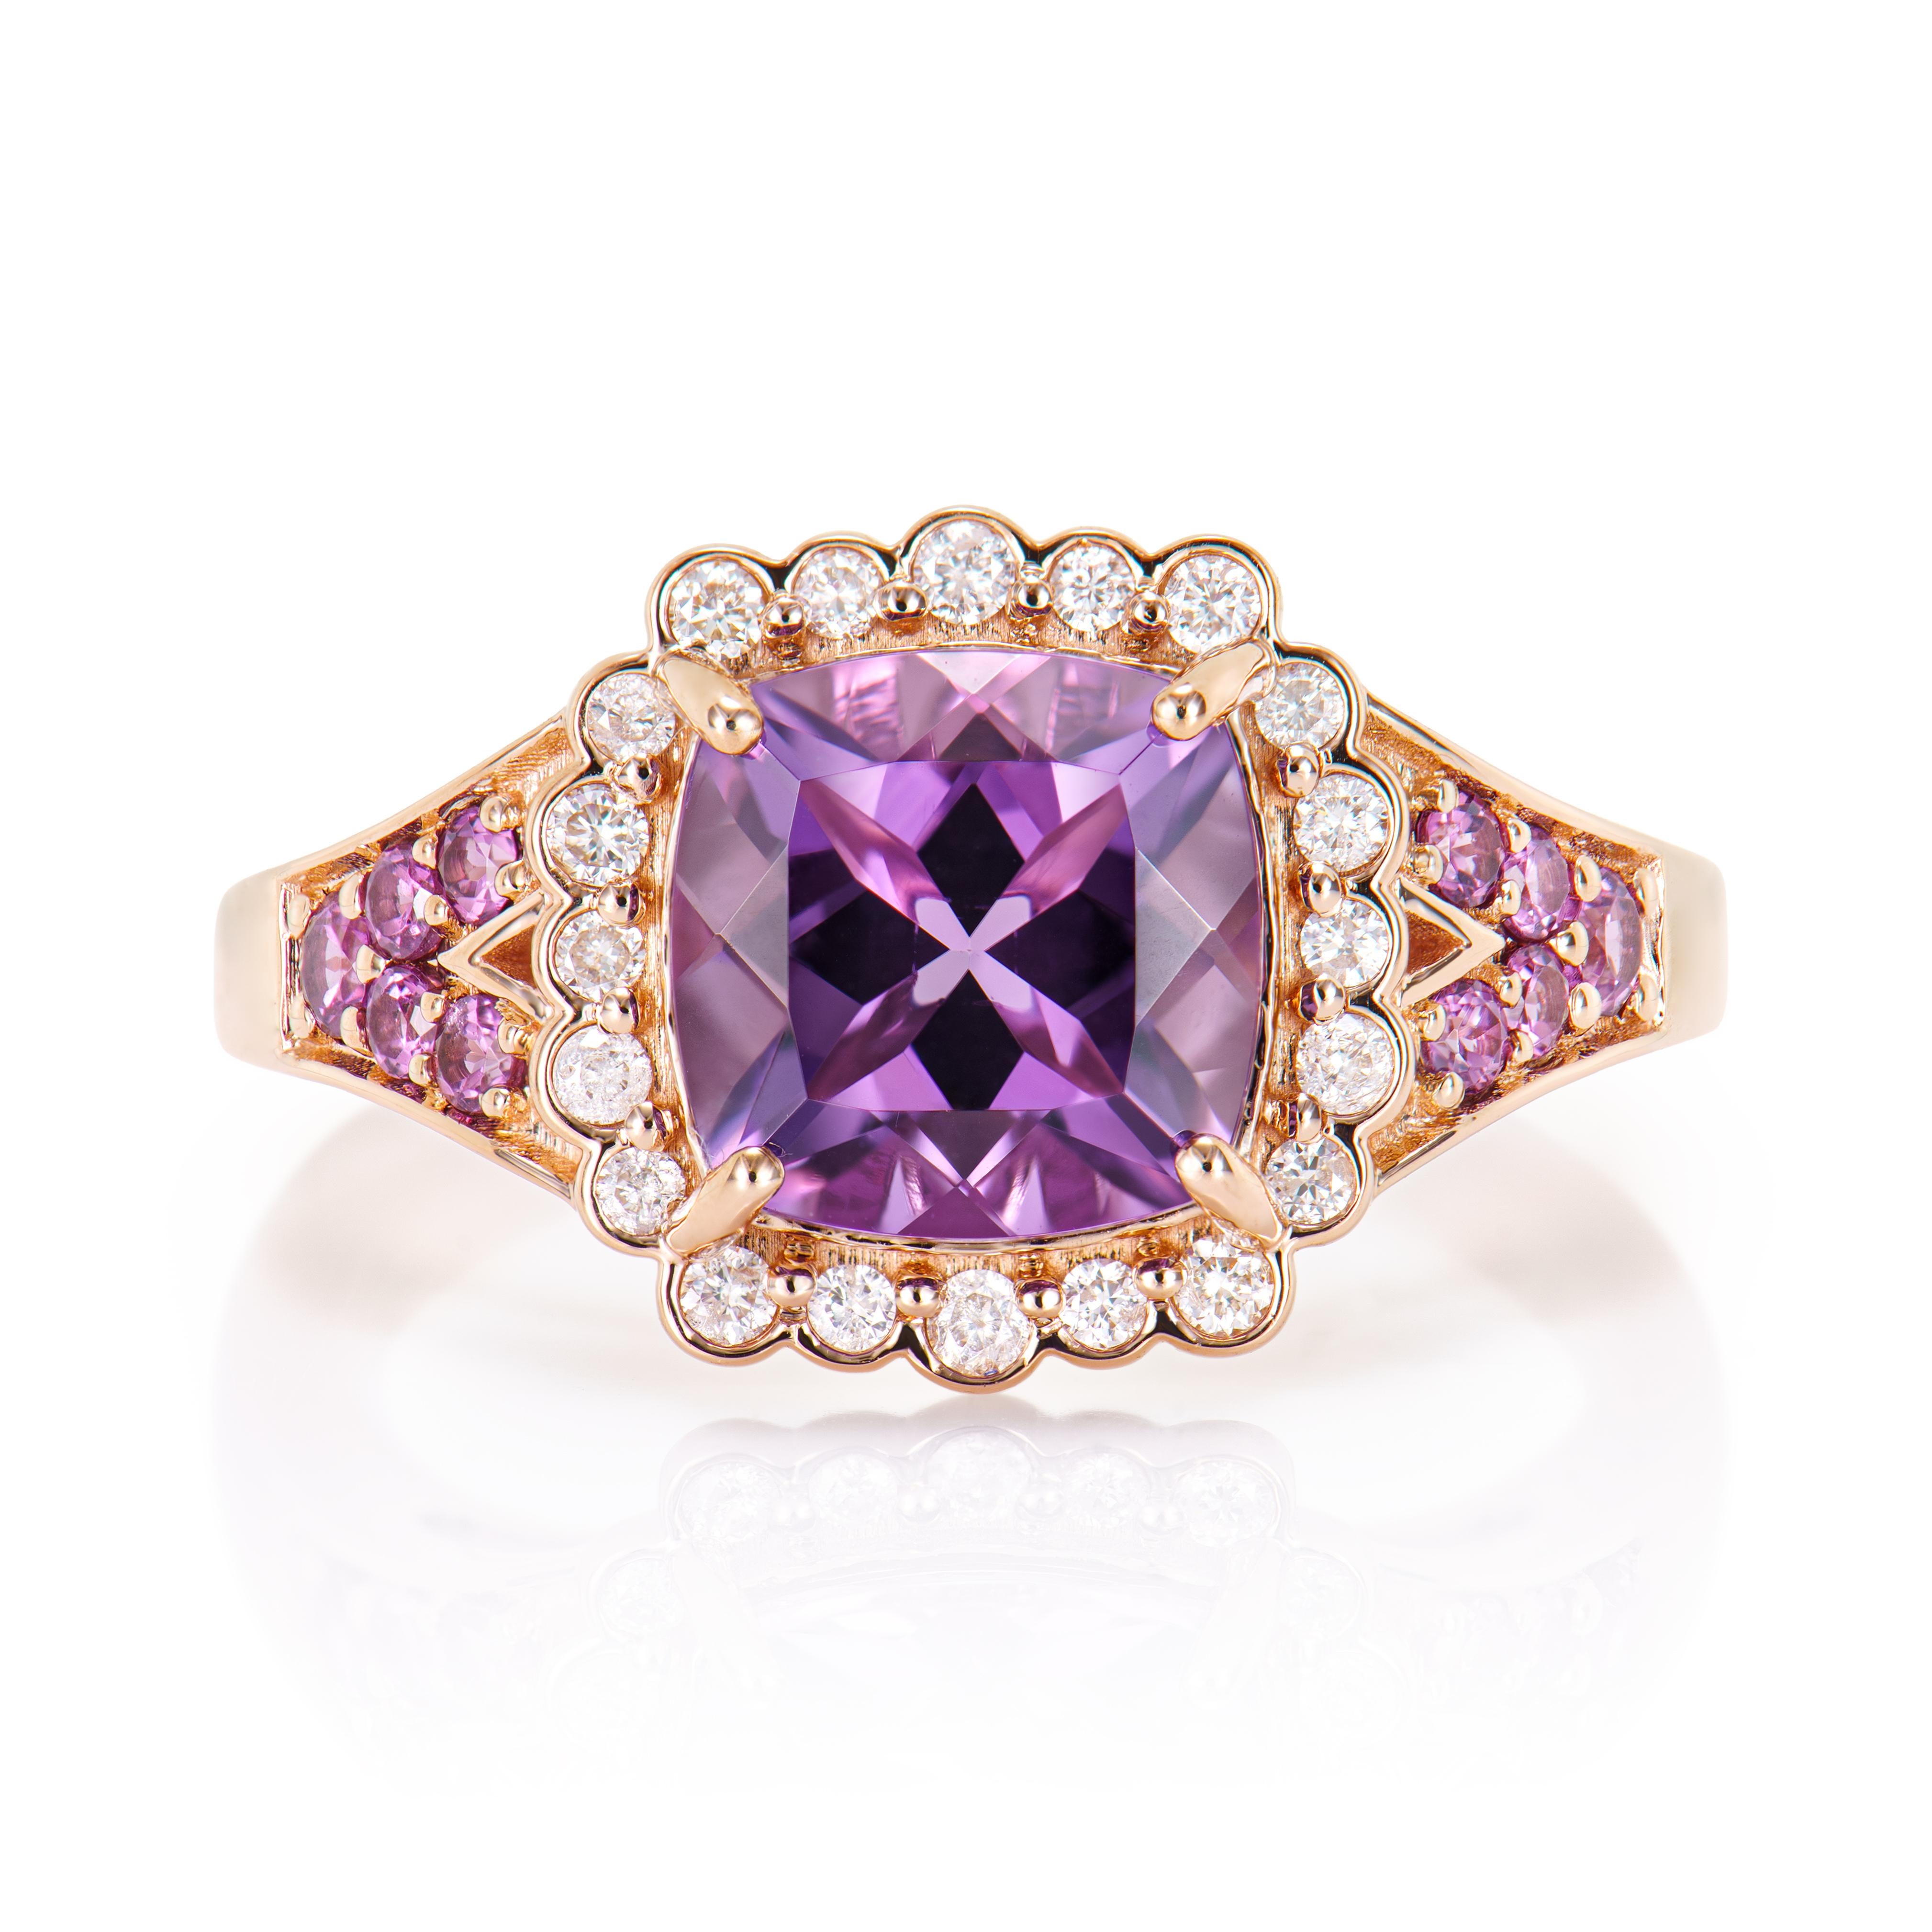 Contemporary 2.05 Carat Amethyst Fancy Ring in 14KRG with Rhodolite and White Diamond.   For Sale